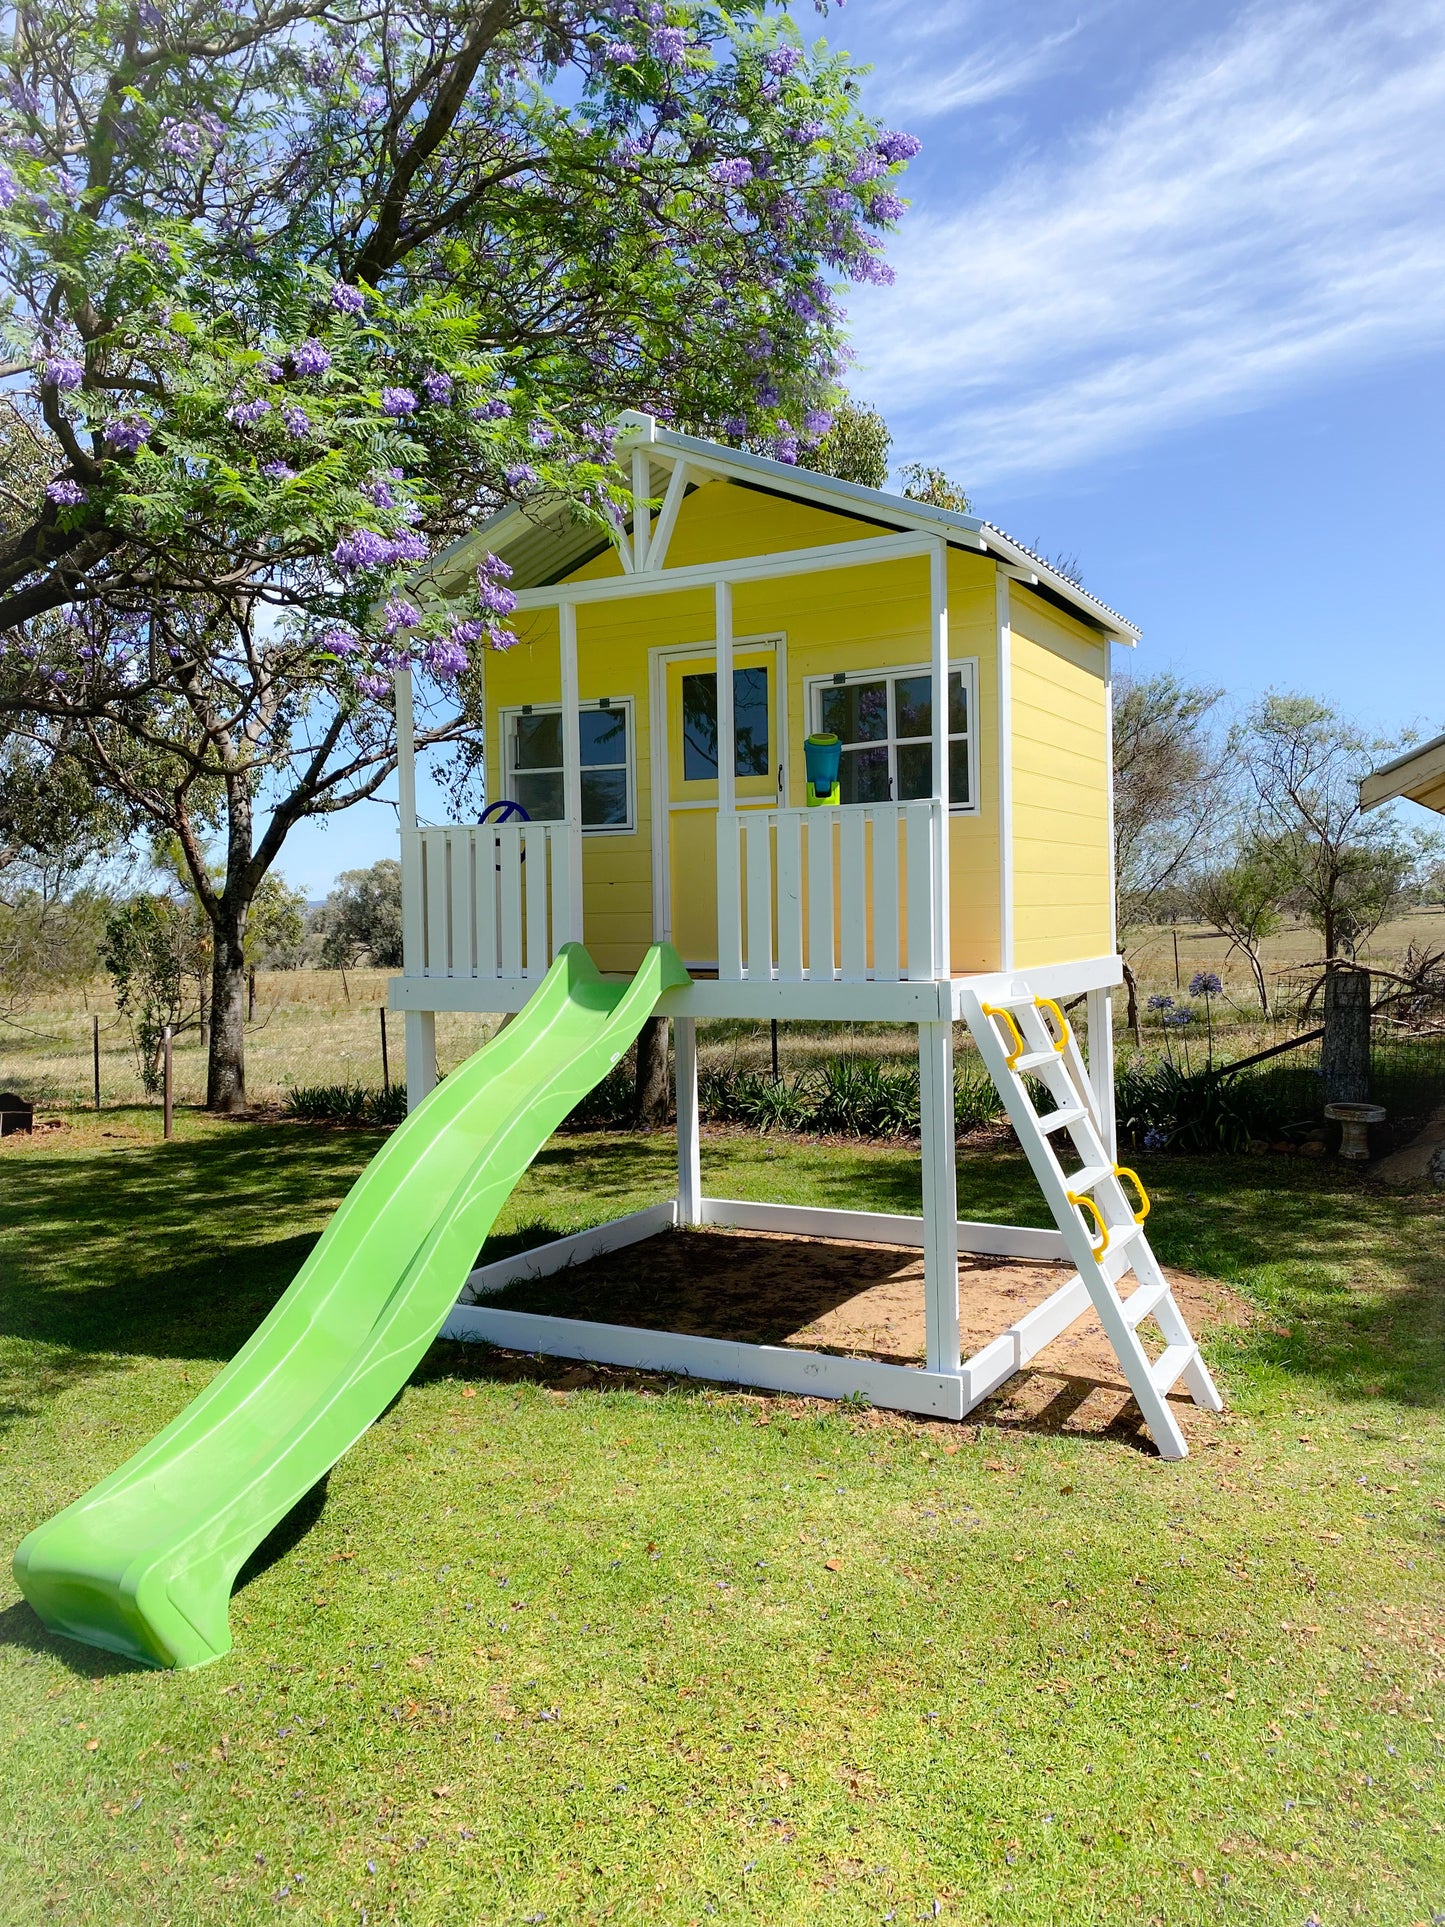 The King Size Beach Hut-Elevated